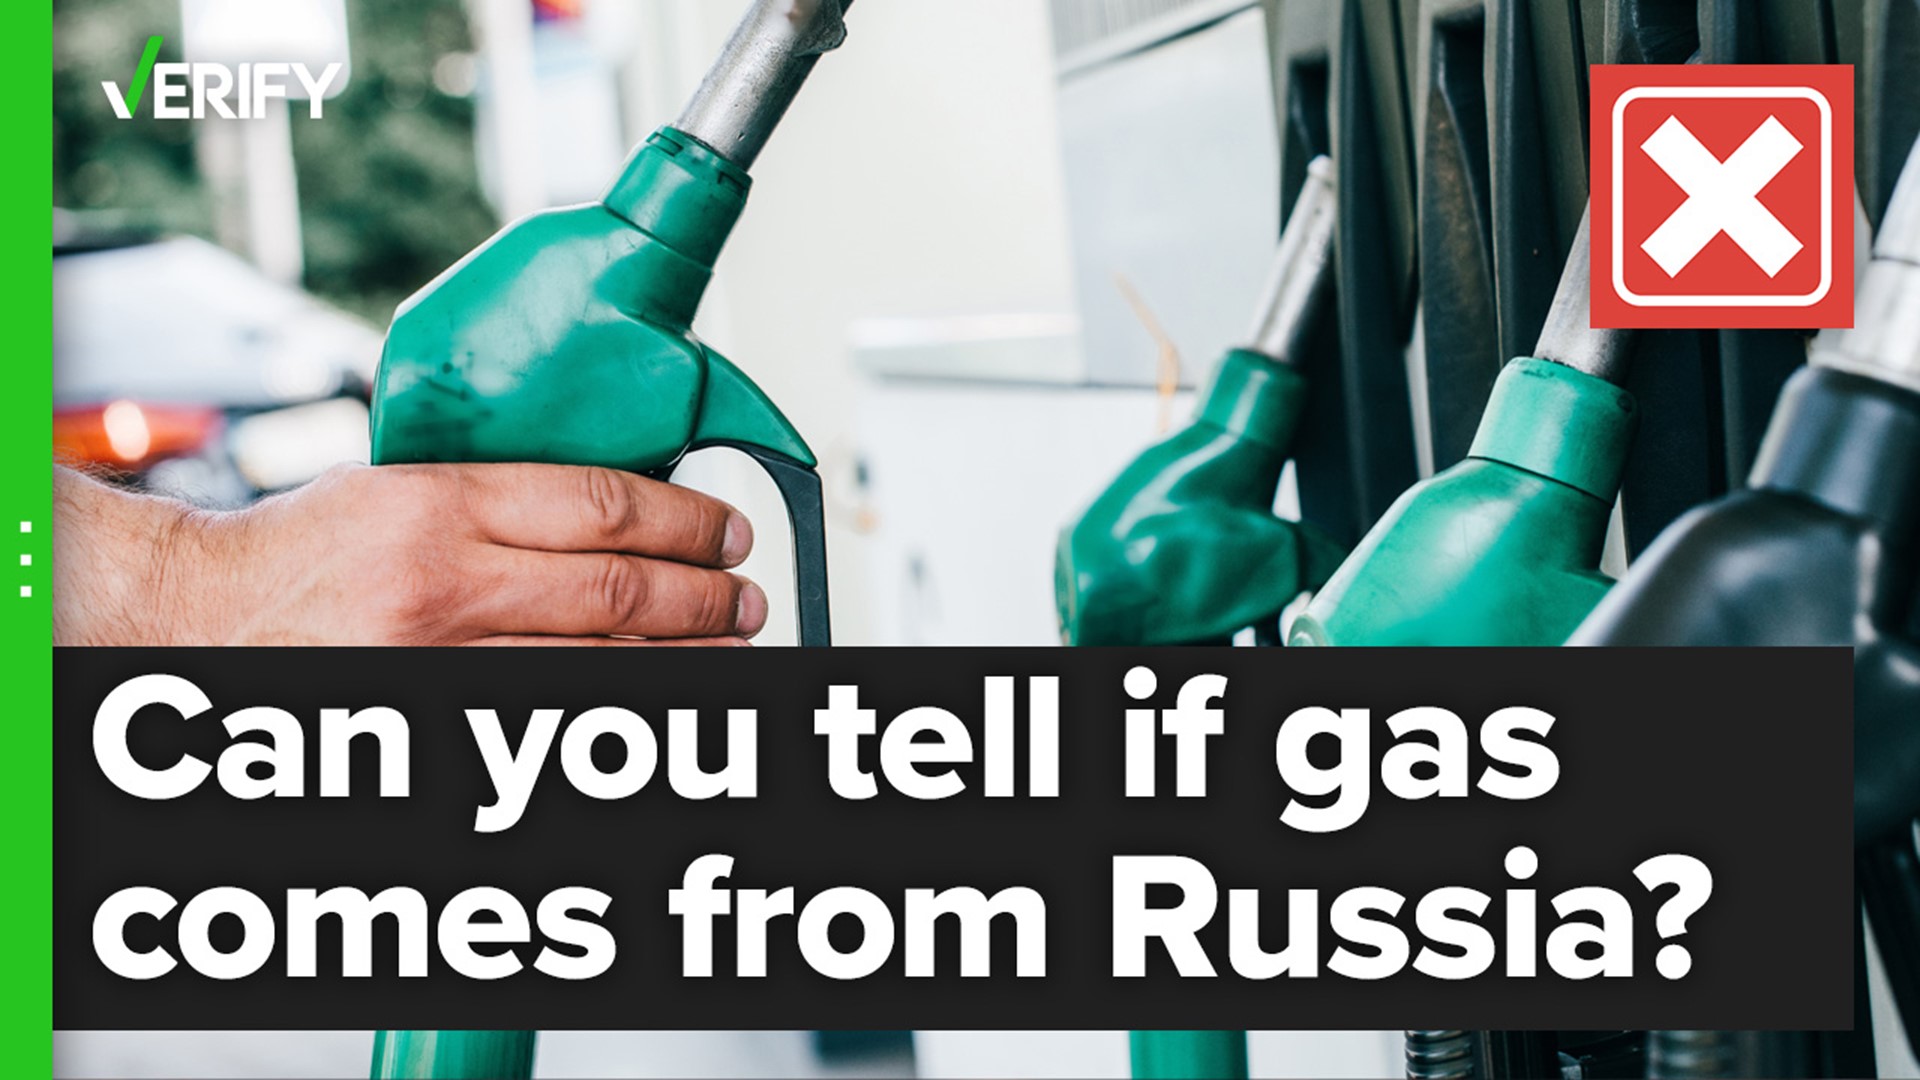 It is nearly impossible to know exactly what country the gas at the pump originated from because gas gets mixed up when it moves from refineries through pipelines.